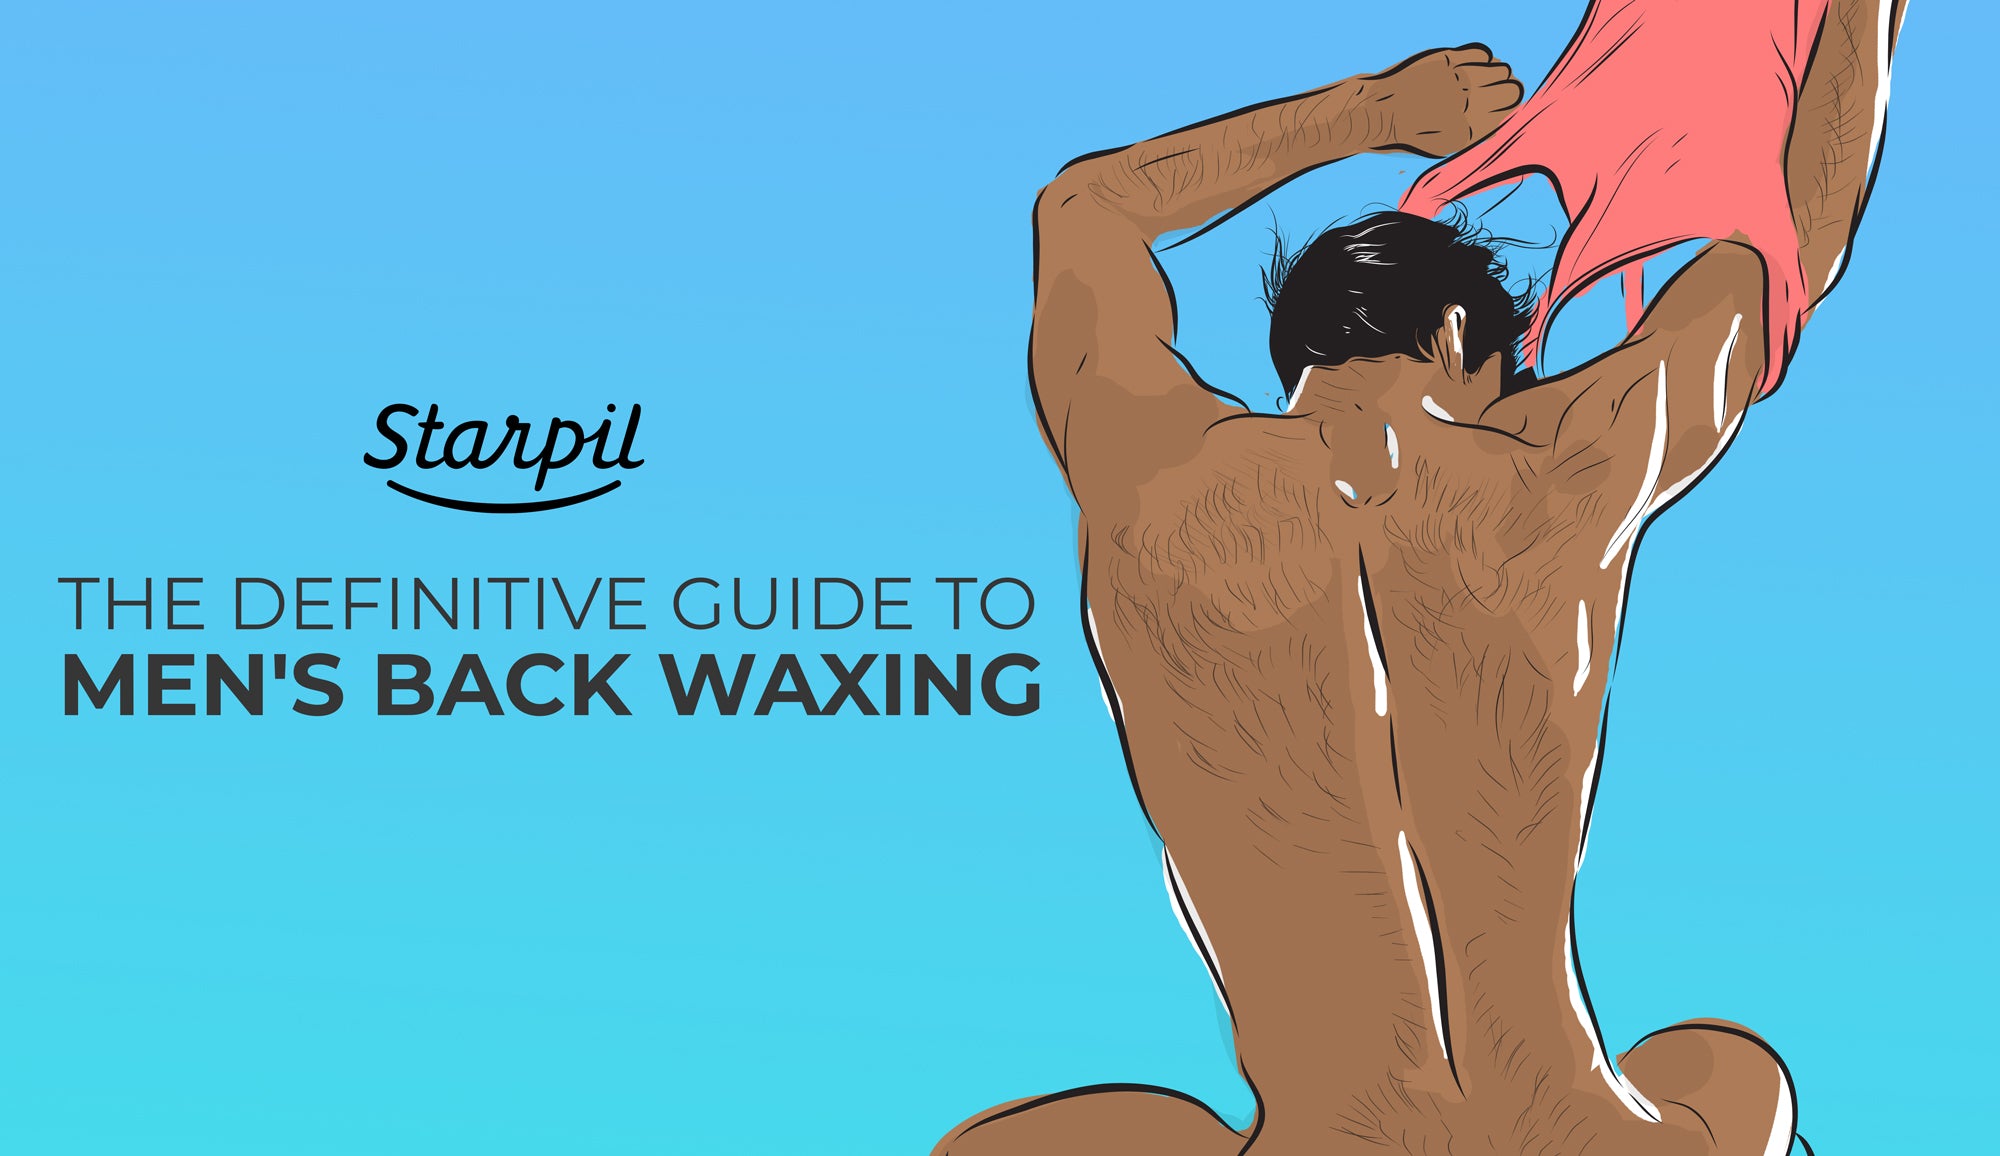 The Definitive Guide to Men's Back Waxing